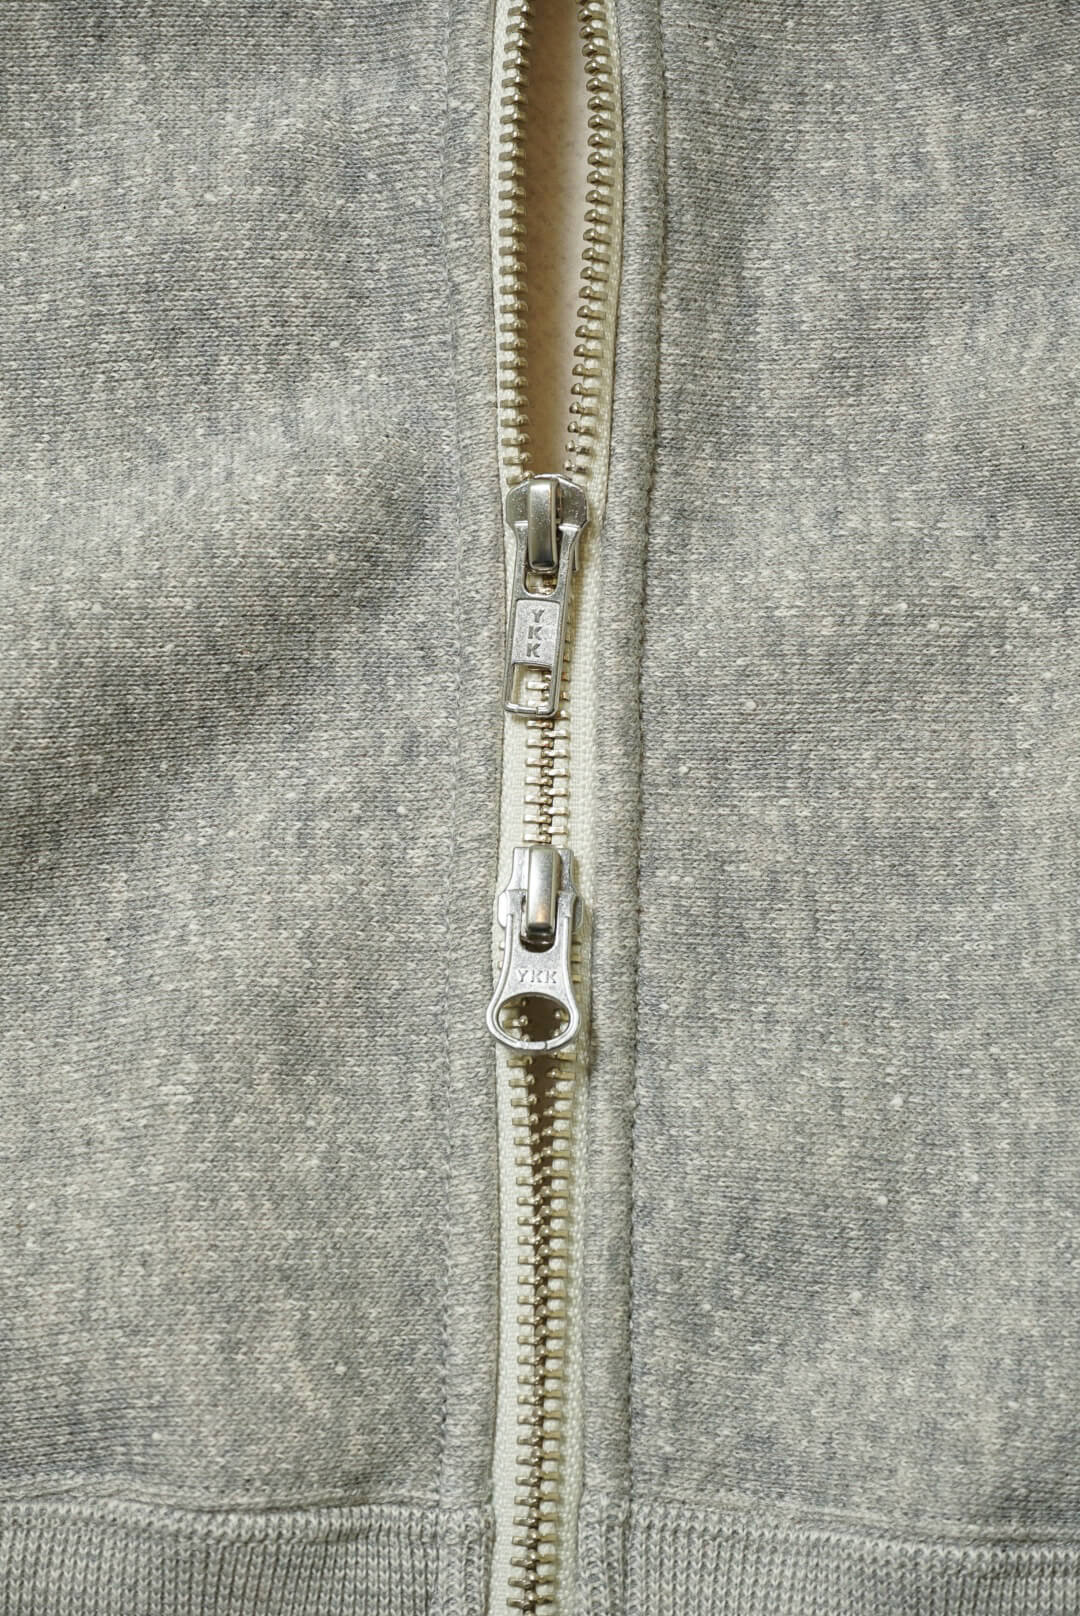 ZIP HOODED SWEAT SHIRT - ARCH EXCLUSIVE